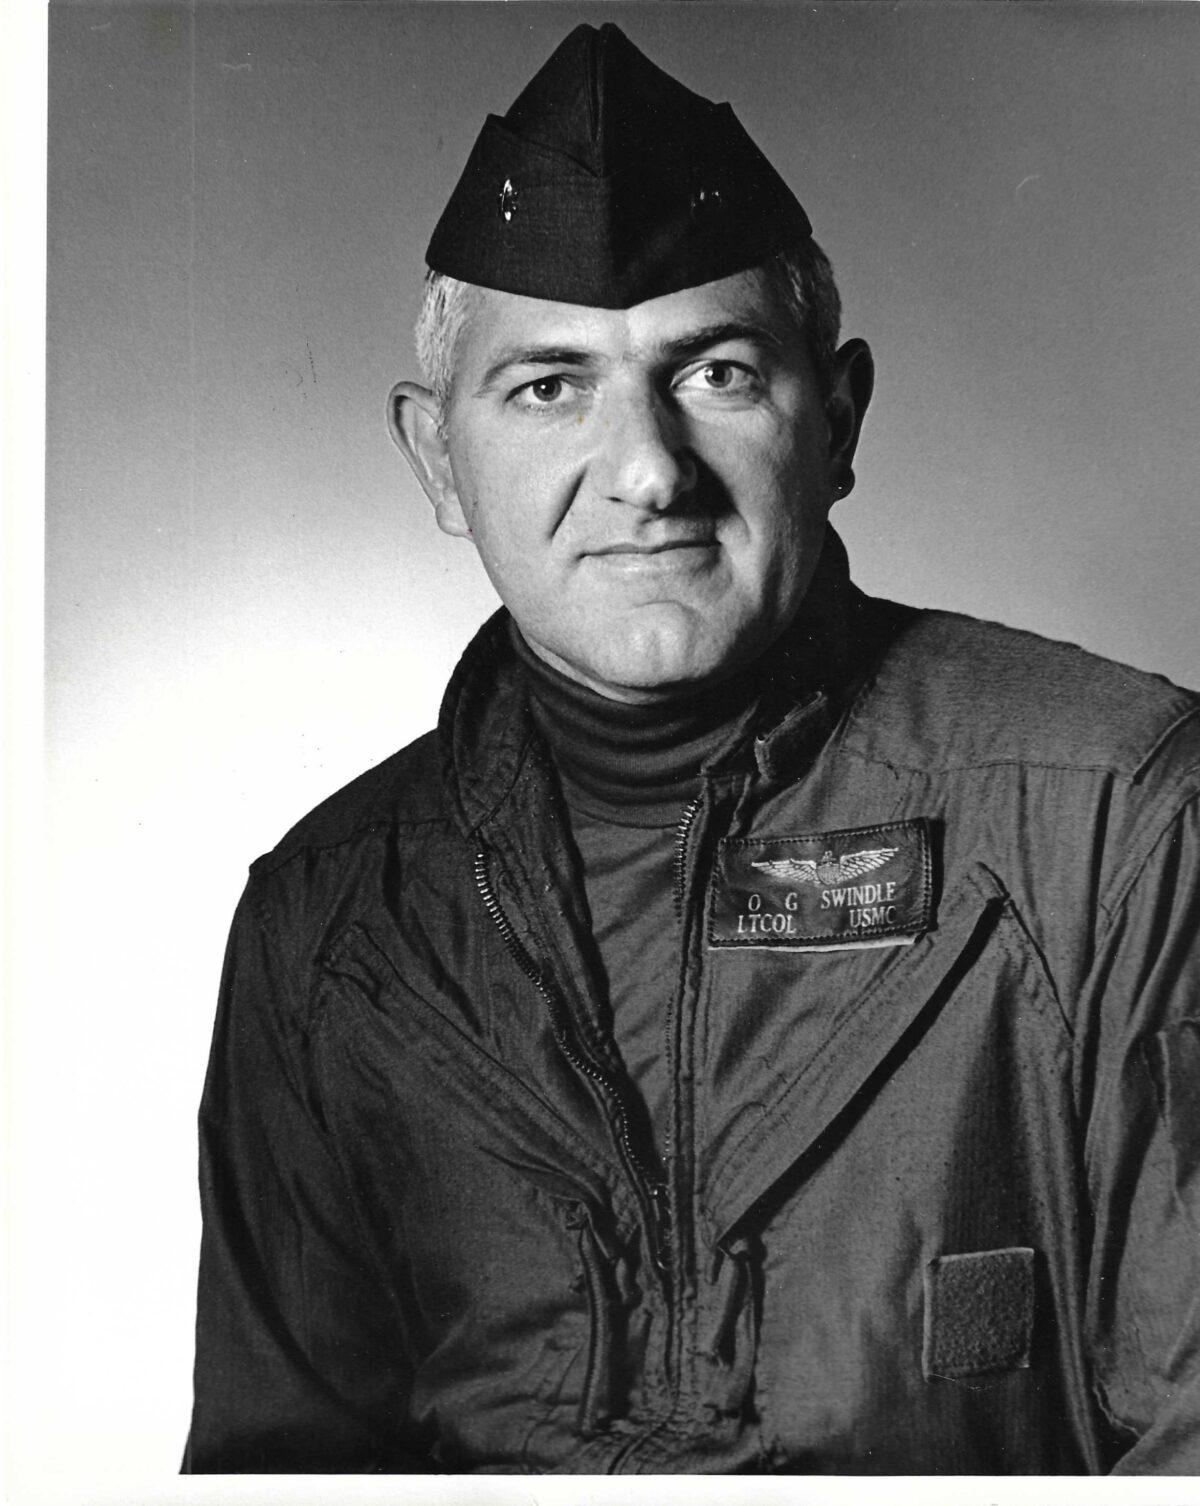 Lt. Col. Orson Swindle, a former Marine Corps pilot who was a prisoner of war in Vietnam, in 1976. (Courtesy of Orson Swindle)